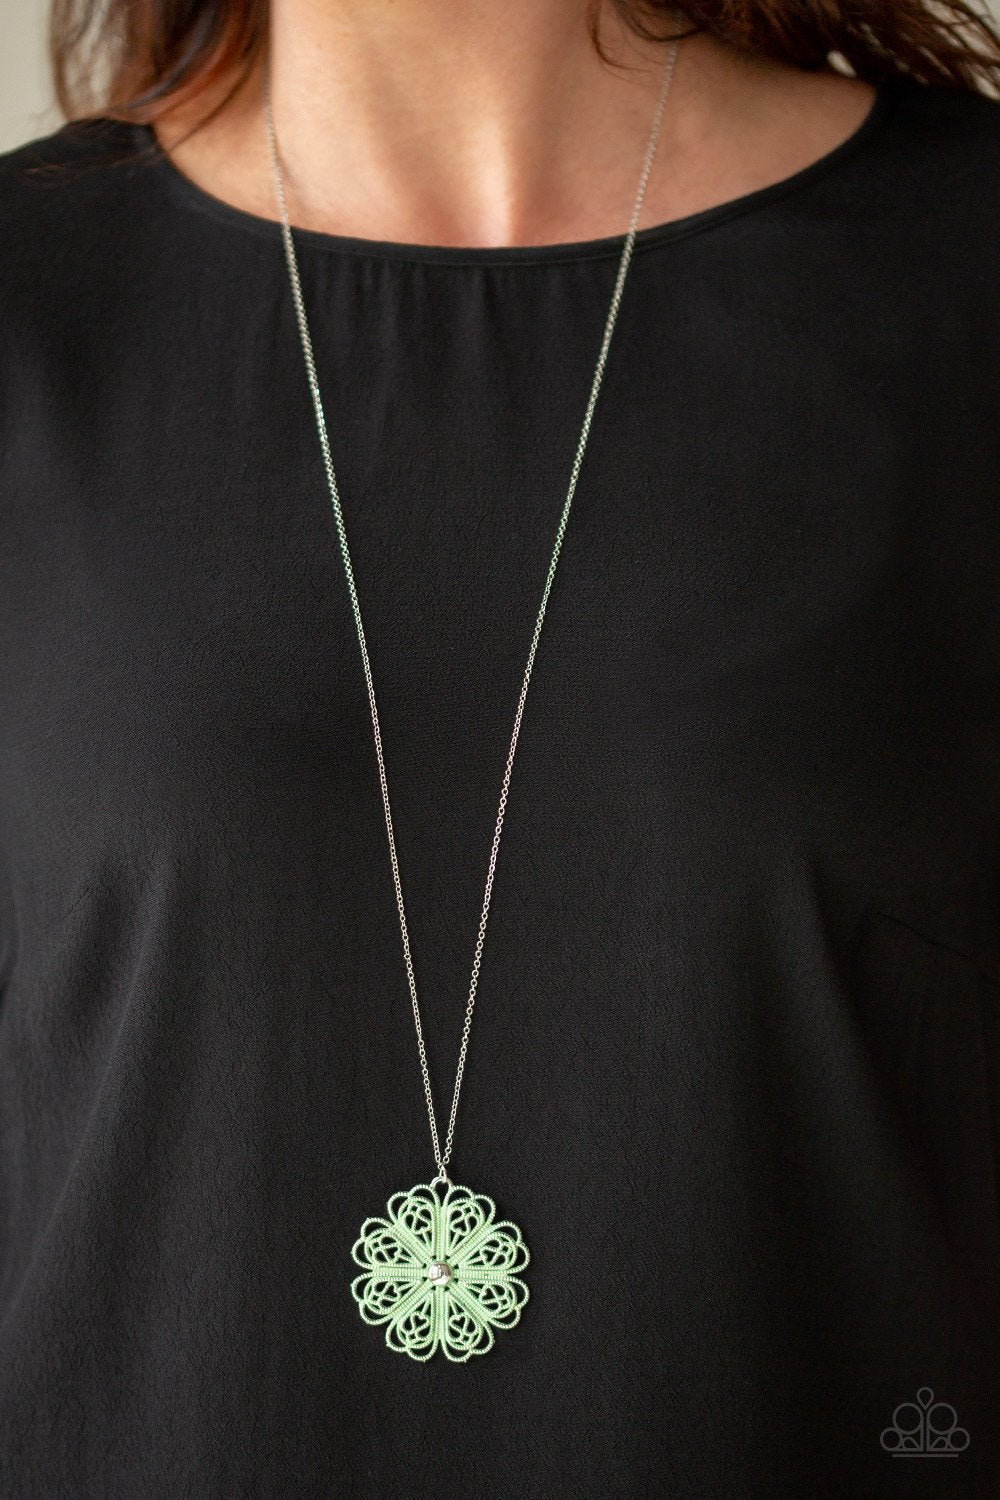 Spin Your Wheel - Green Necklace 1061N